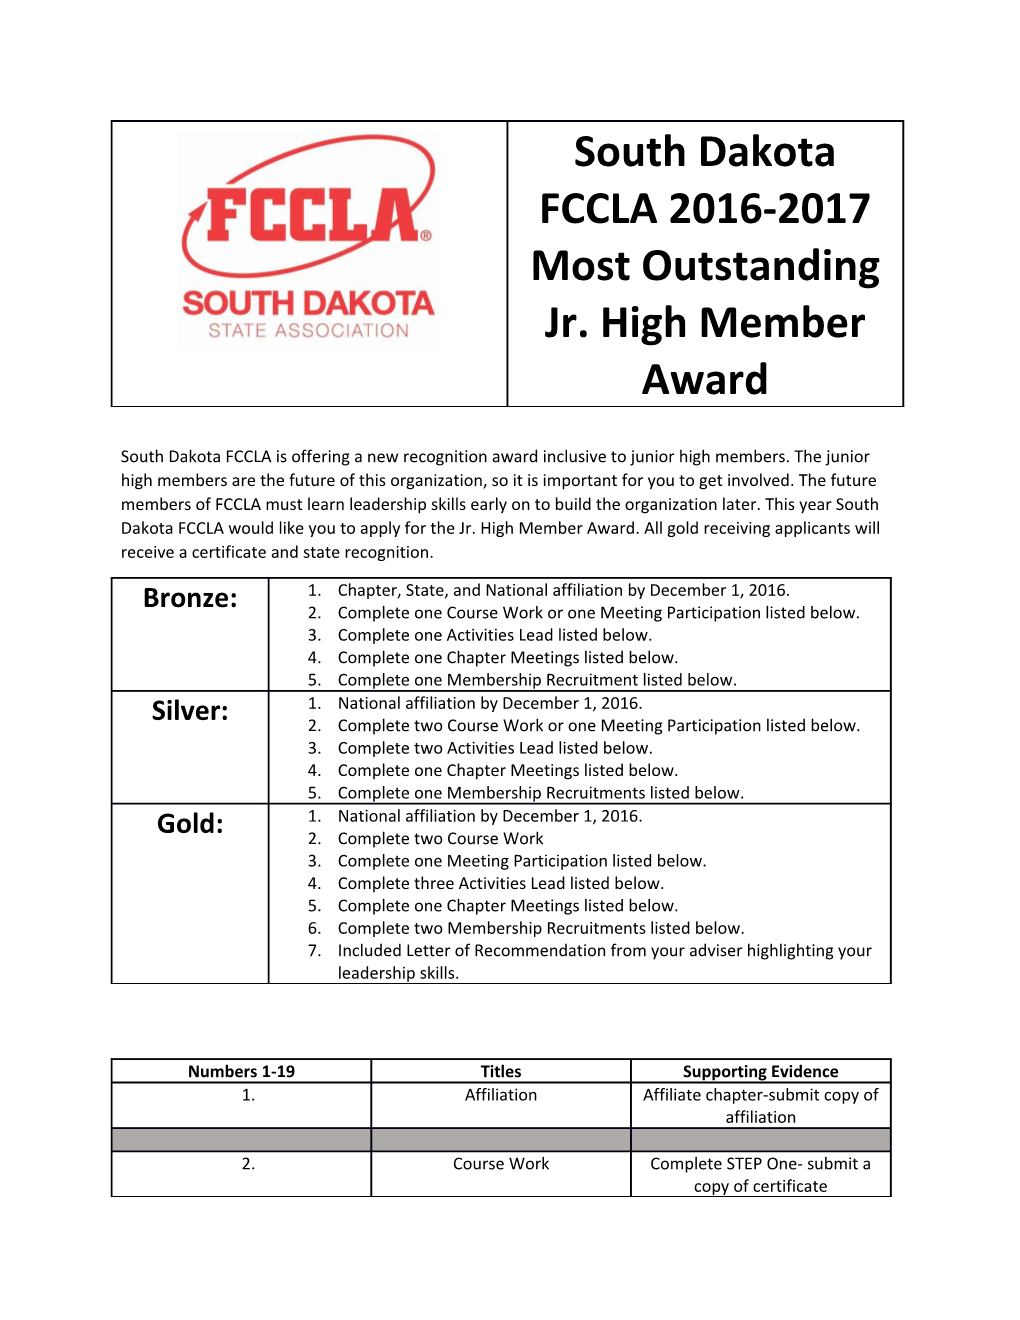 South Dakota FCCLA Is Offering a New Recognition Award Inclusive to Junior High Members